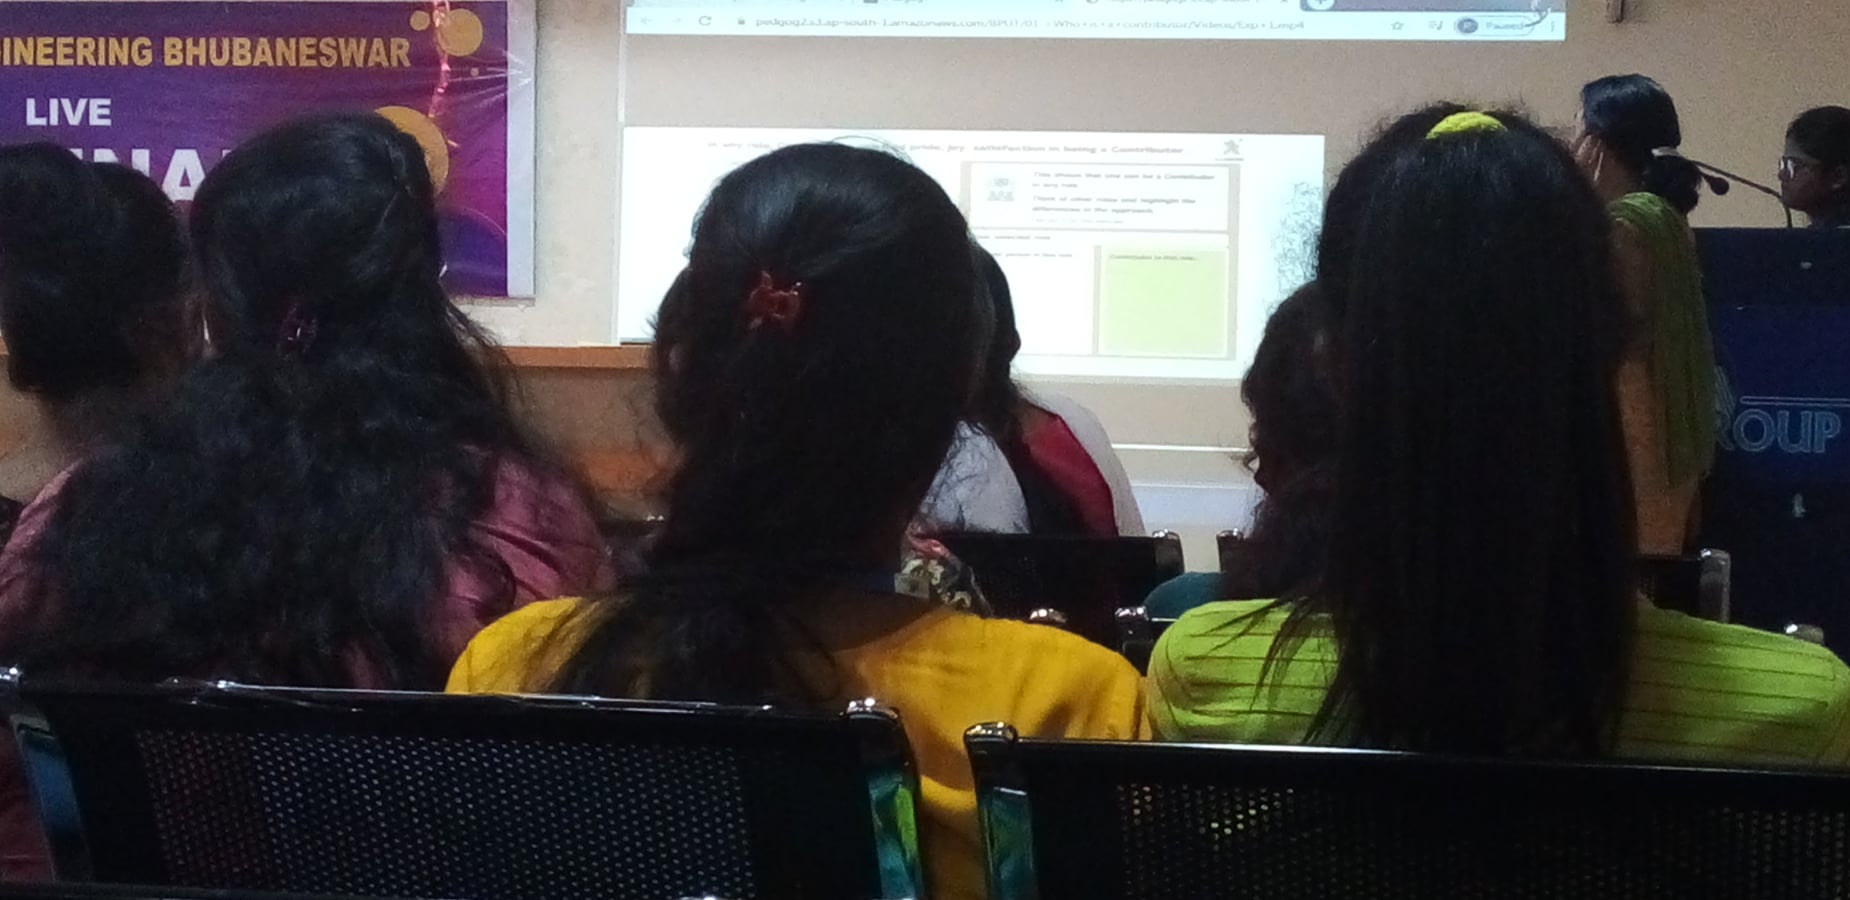 College of Engineering Bhubaneswar (COEB) has organized open discussion platform on the theme of International Women’s Day, “Choose to Challenge”.